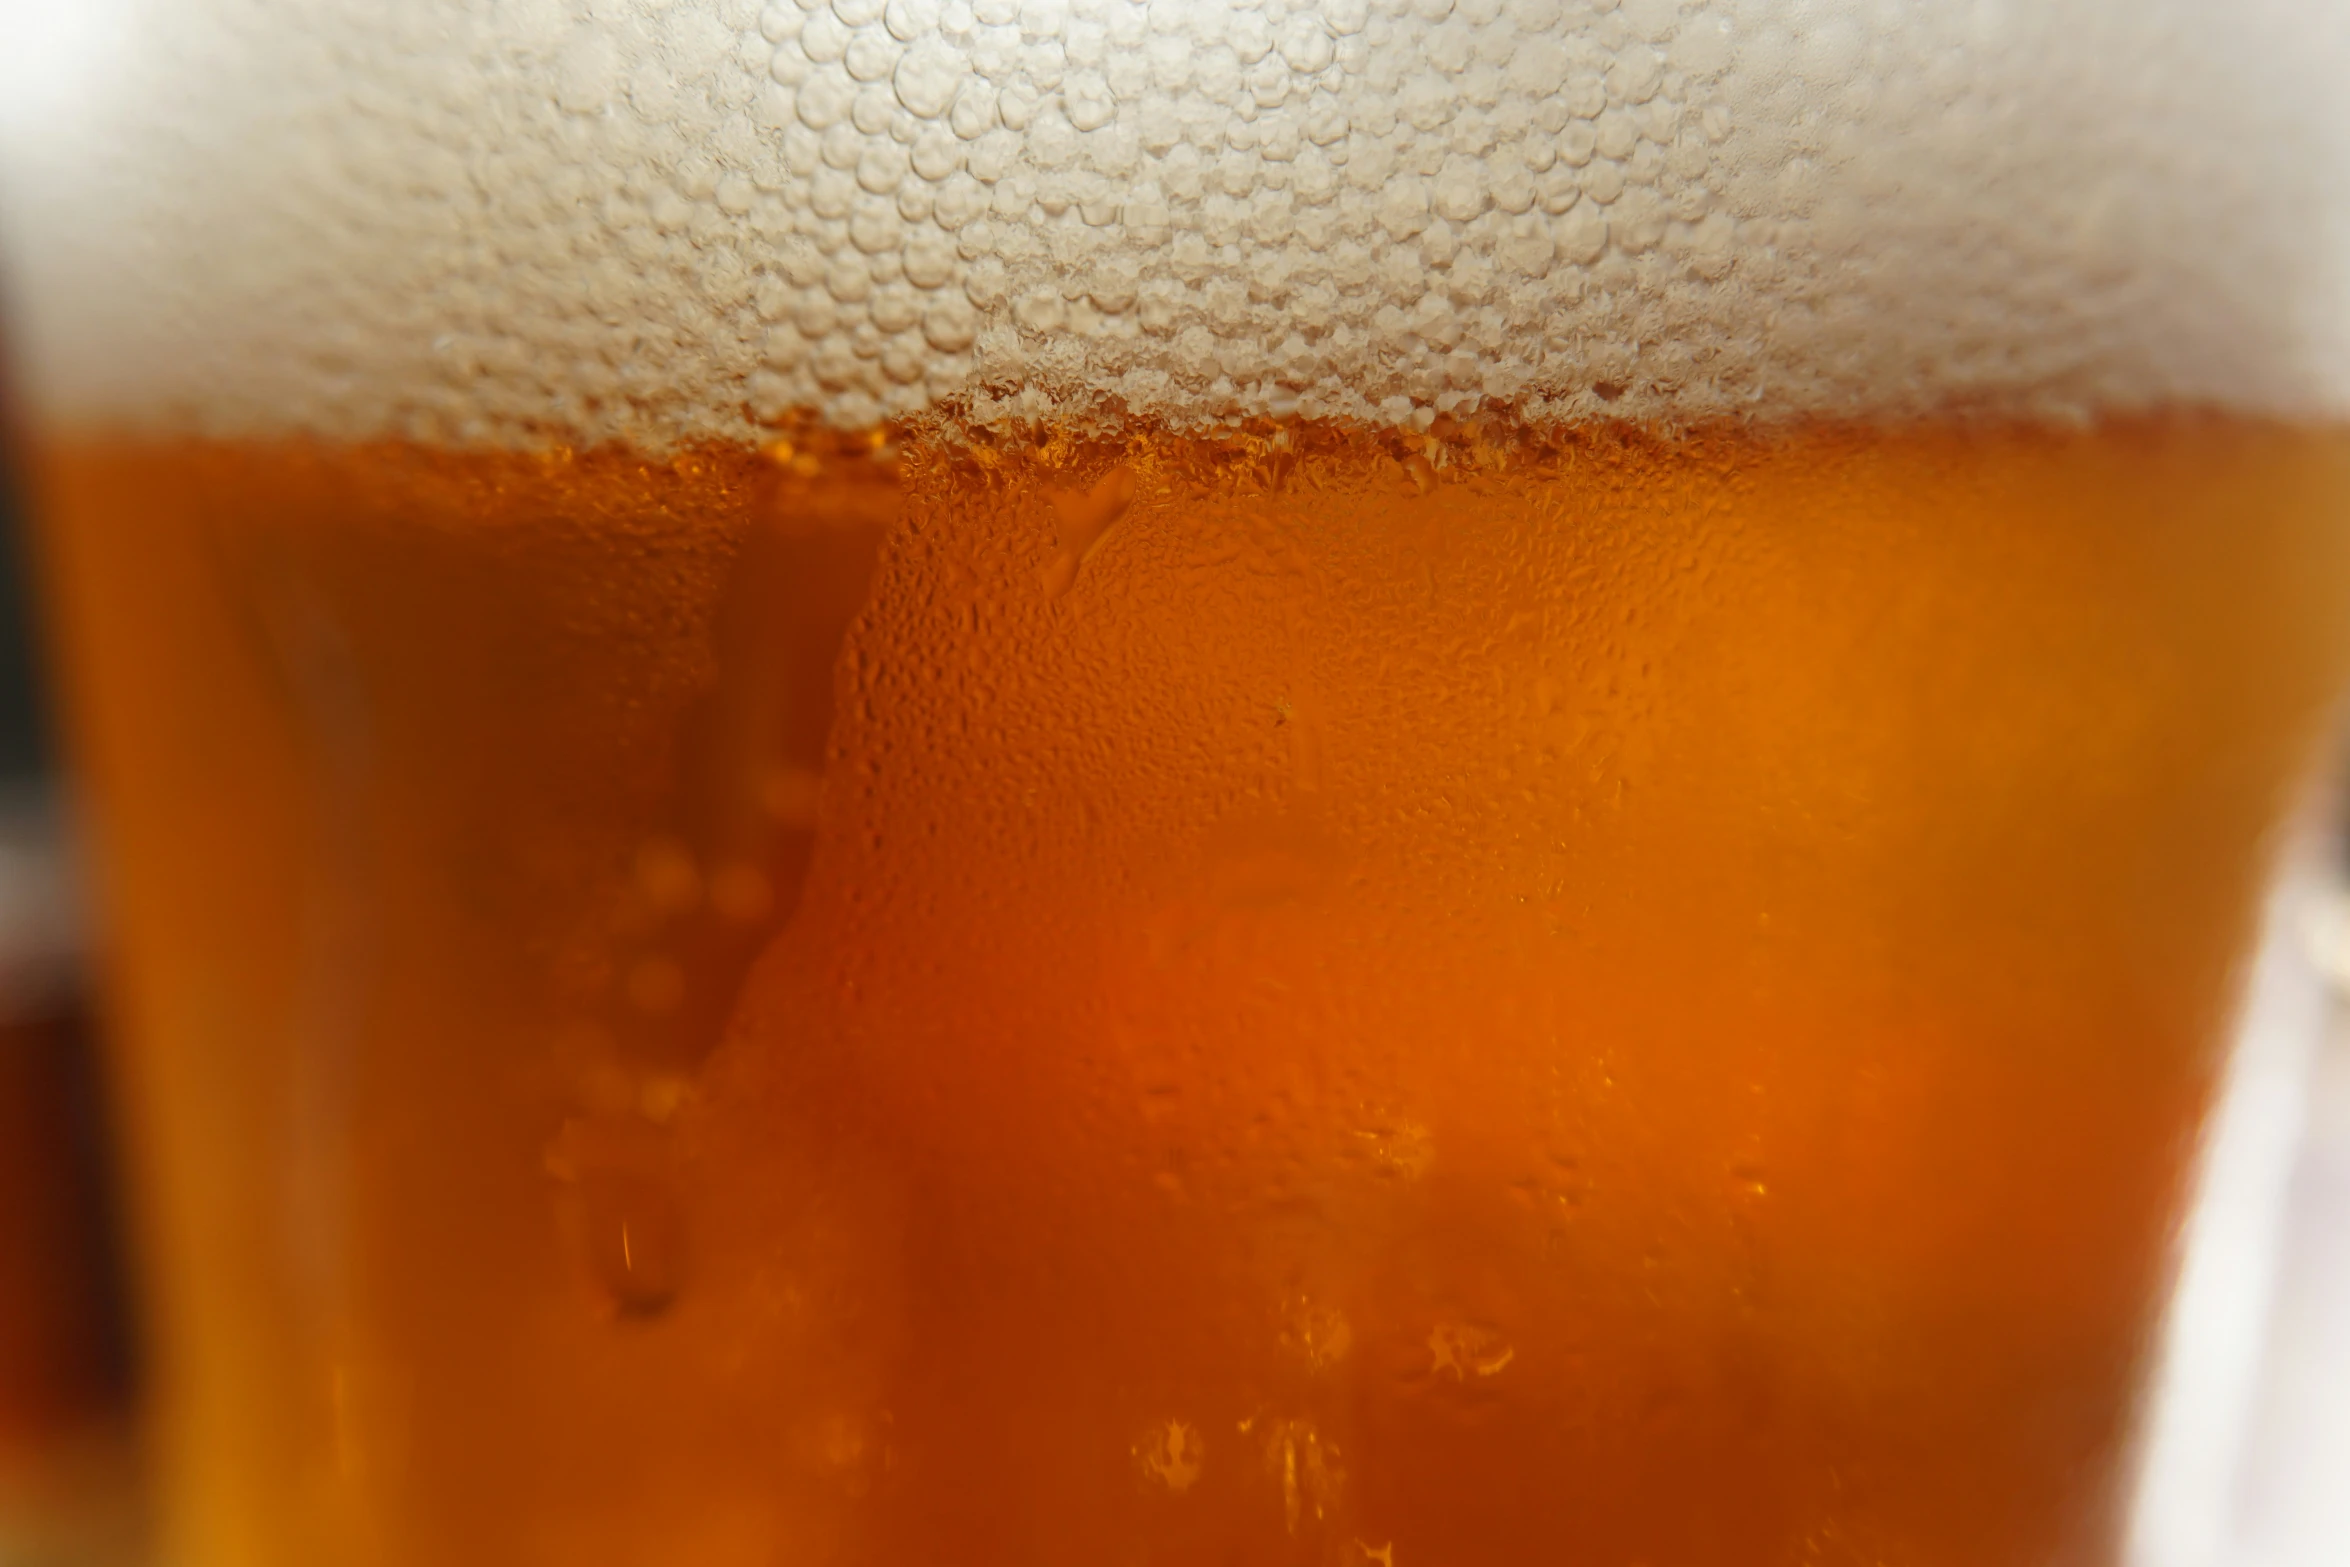 beer is in a glass, closeup, as it's ready to be drank